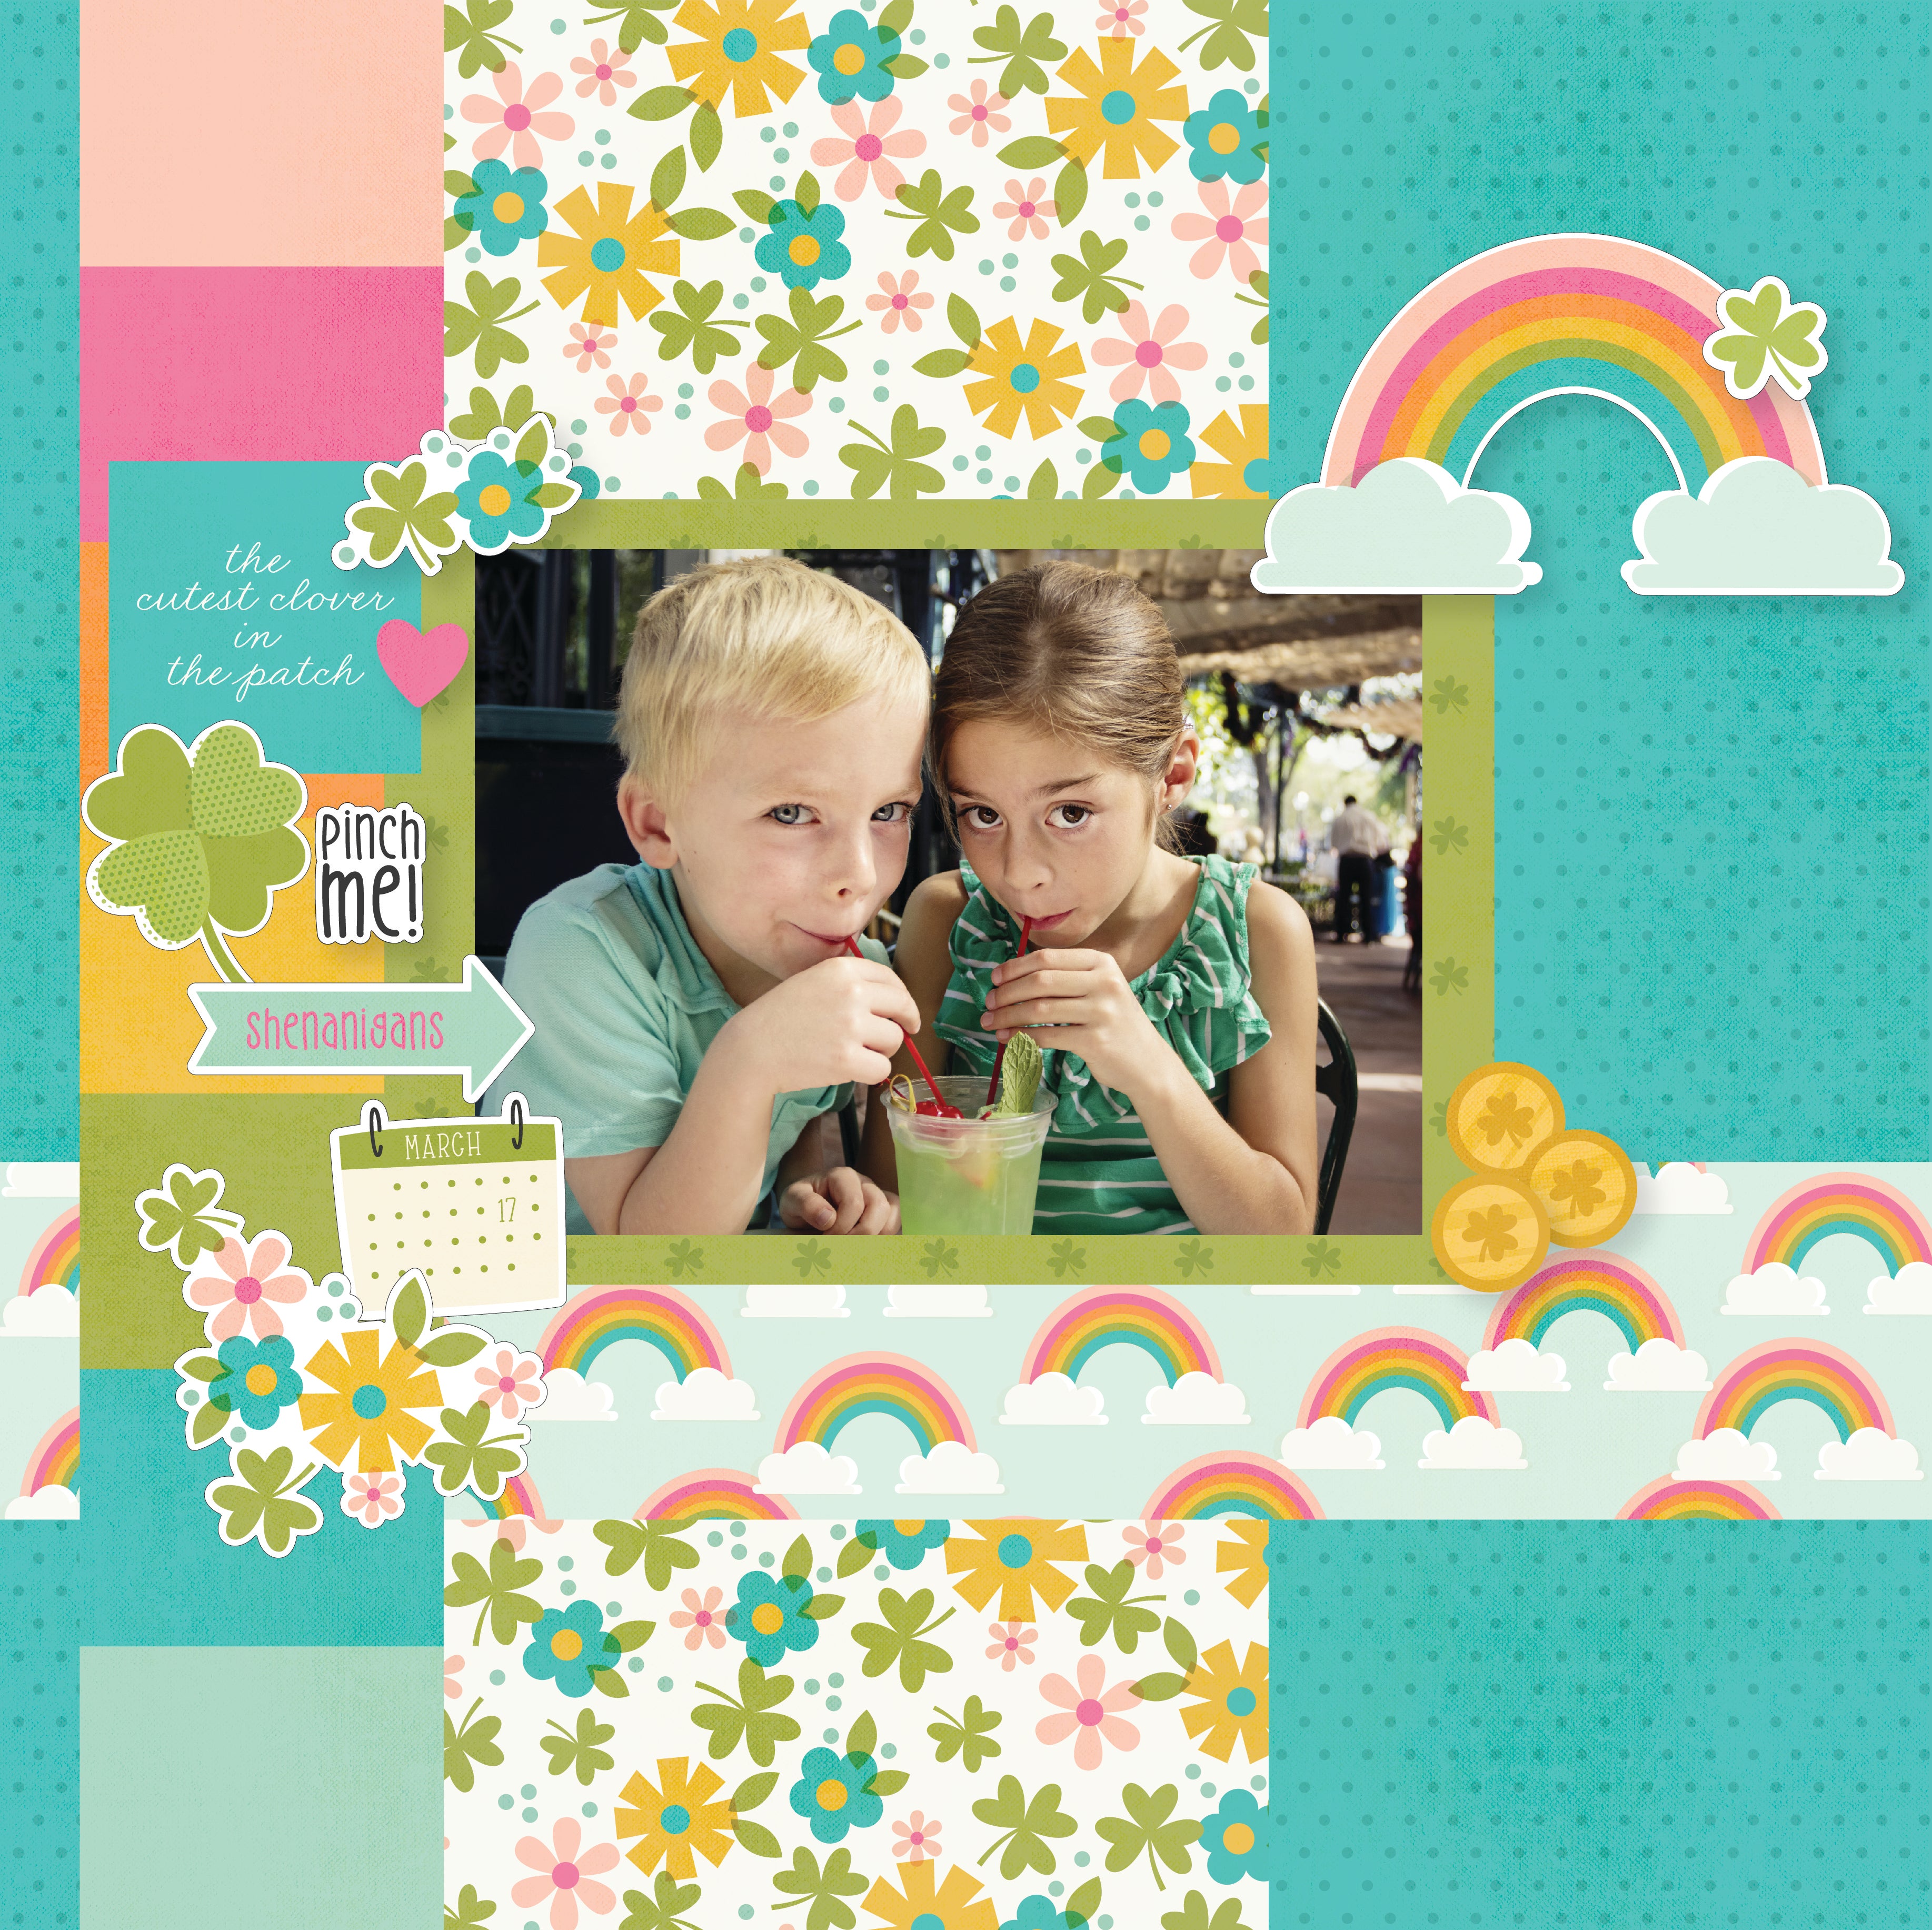 St. Patrick's Day Collection Elements 12 x 12 Double-Sided Scrapbook Paper by Simple Stories